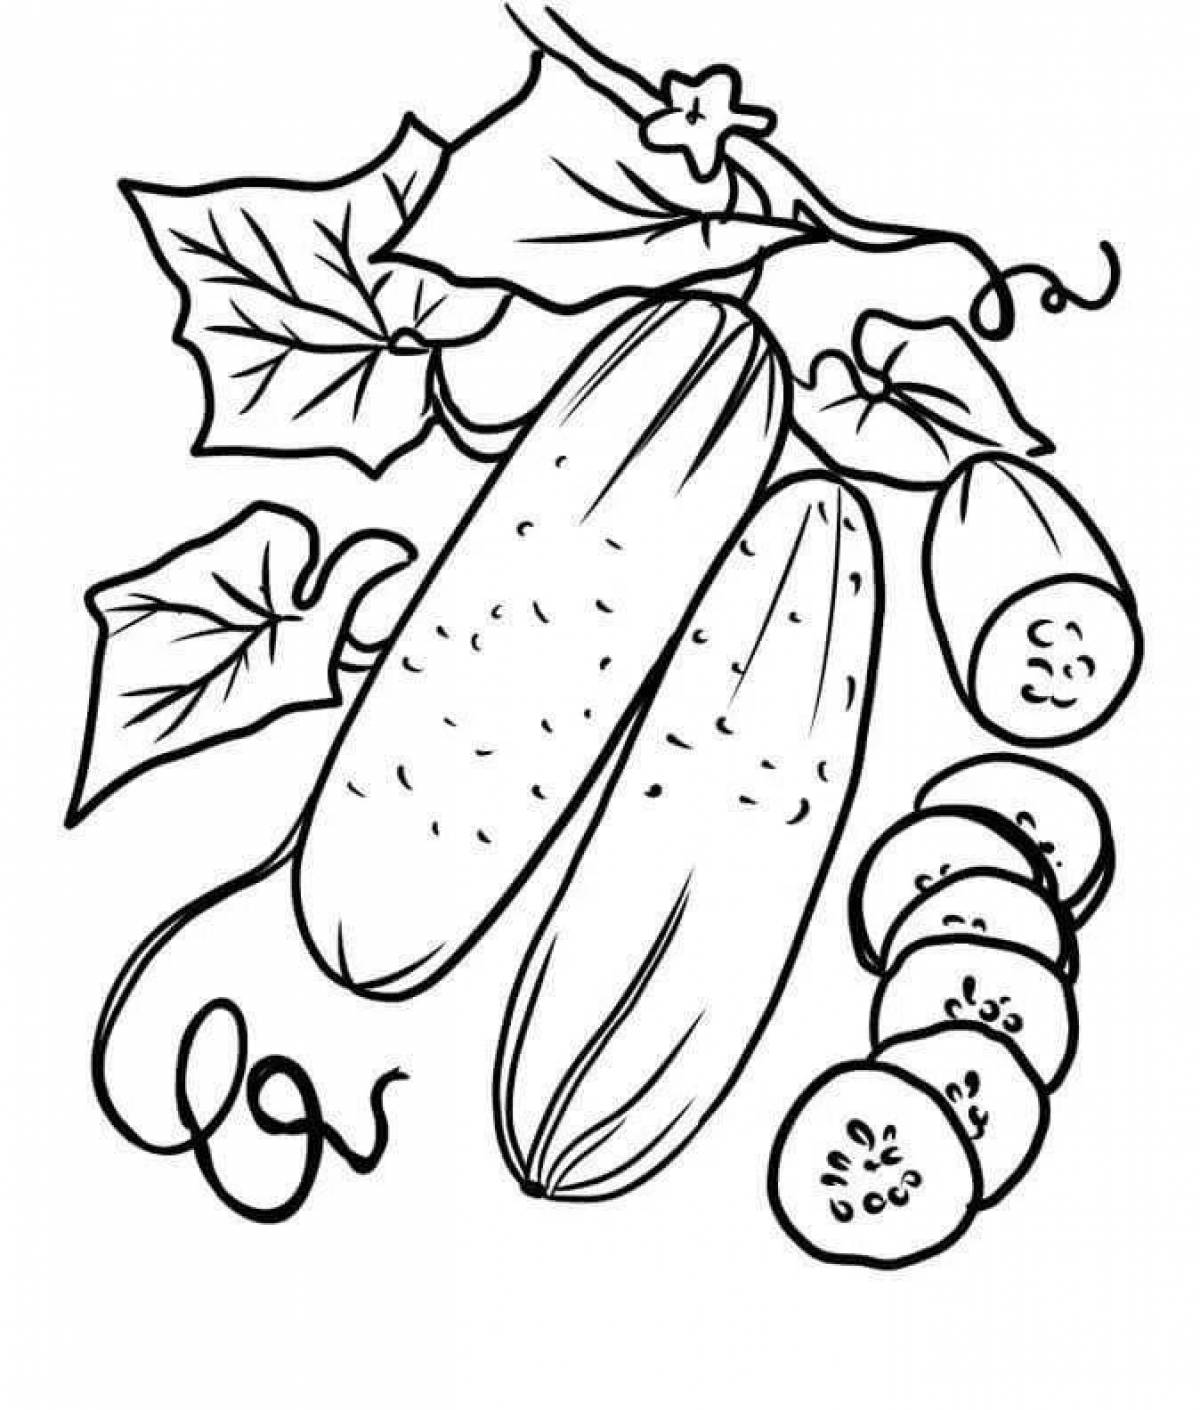 Amazing cucumber coloring page